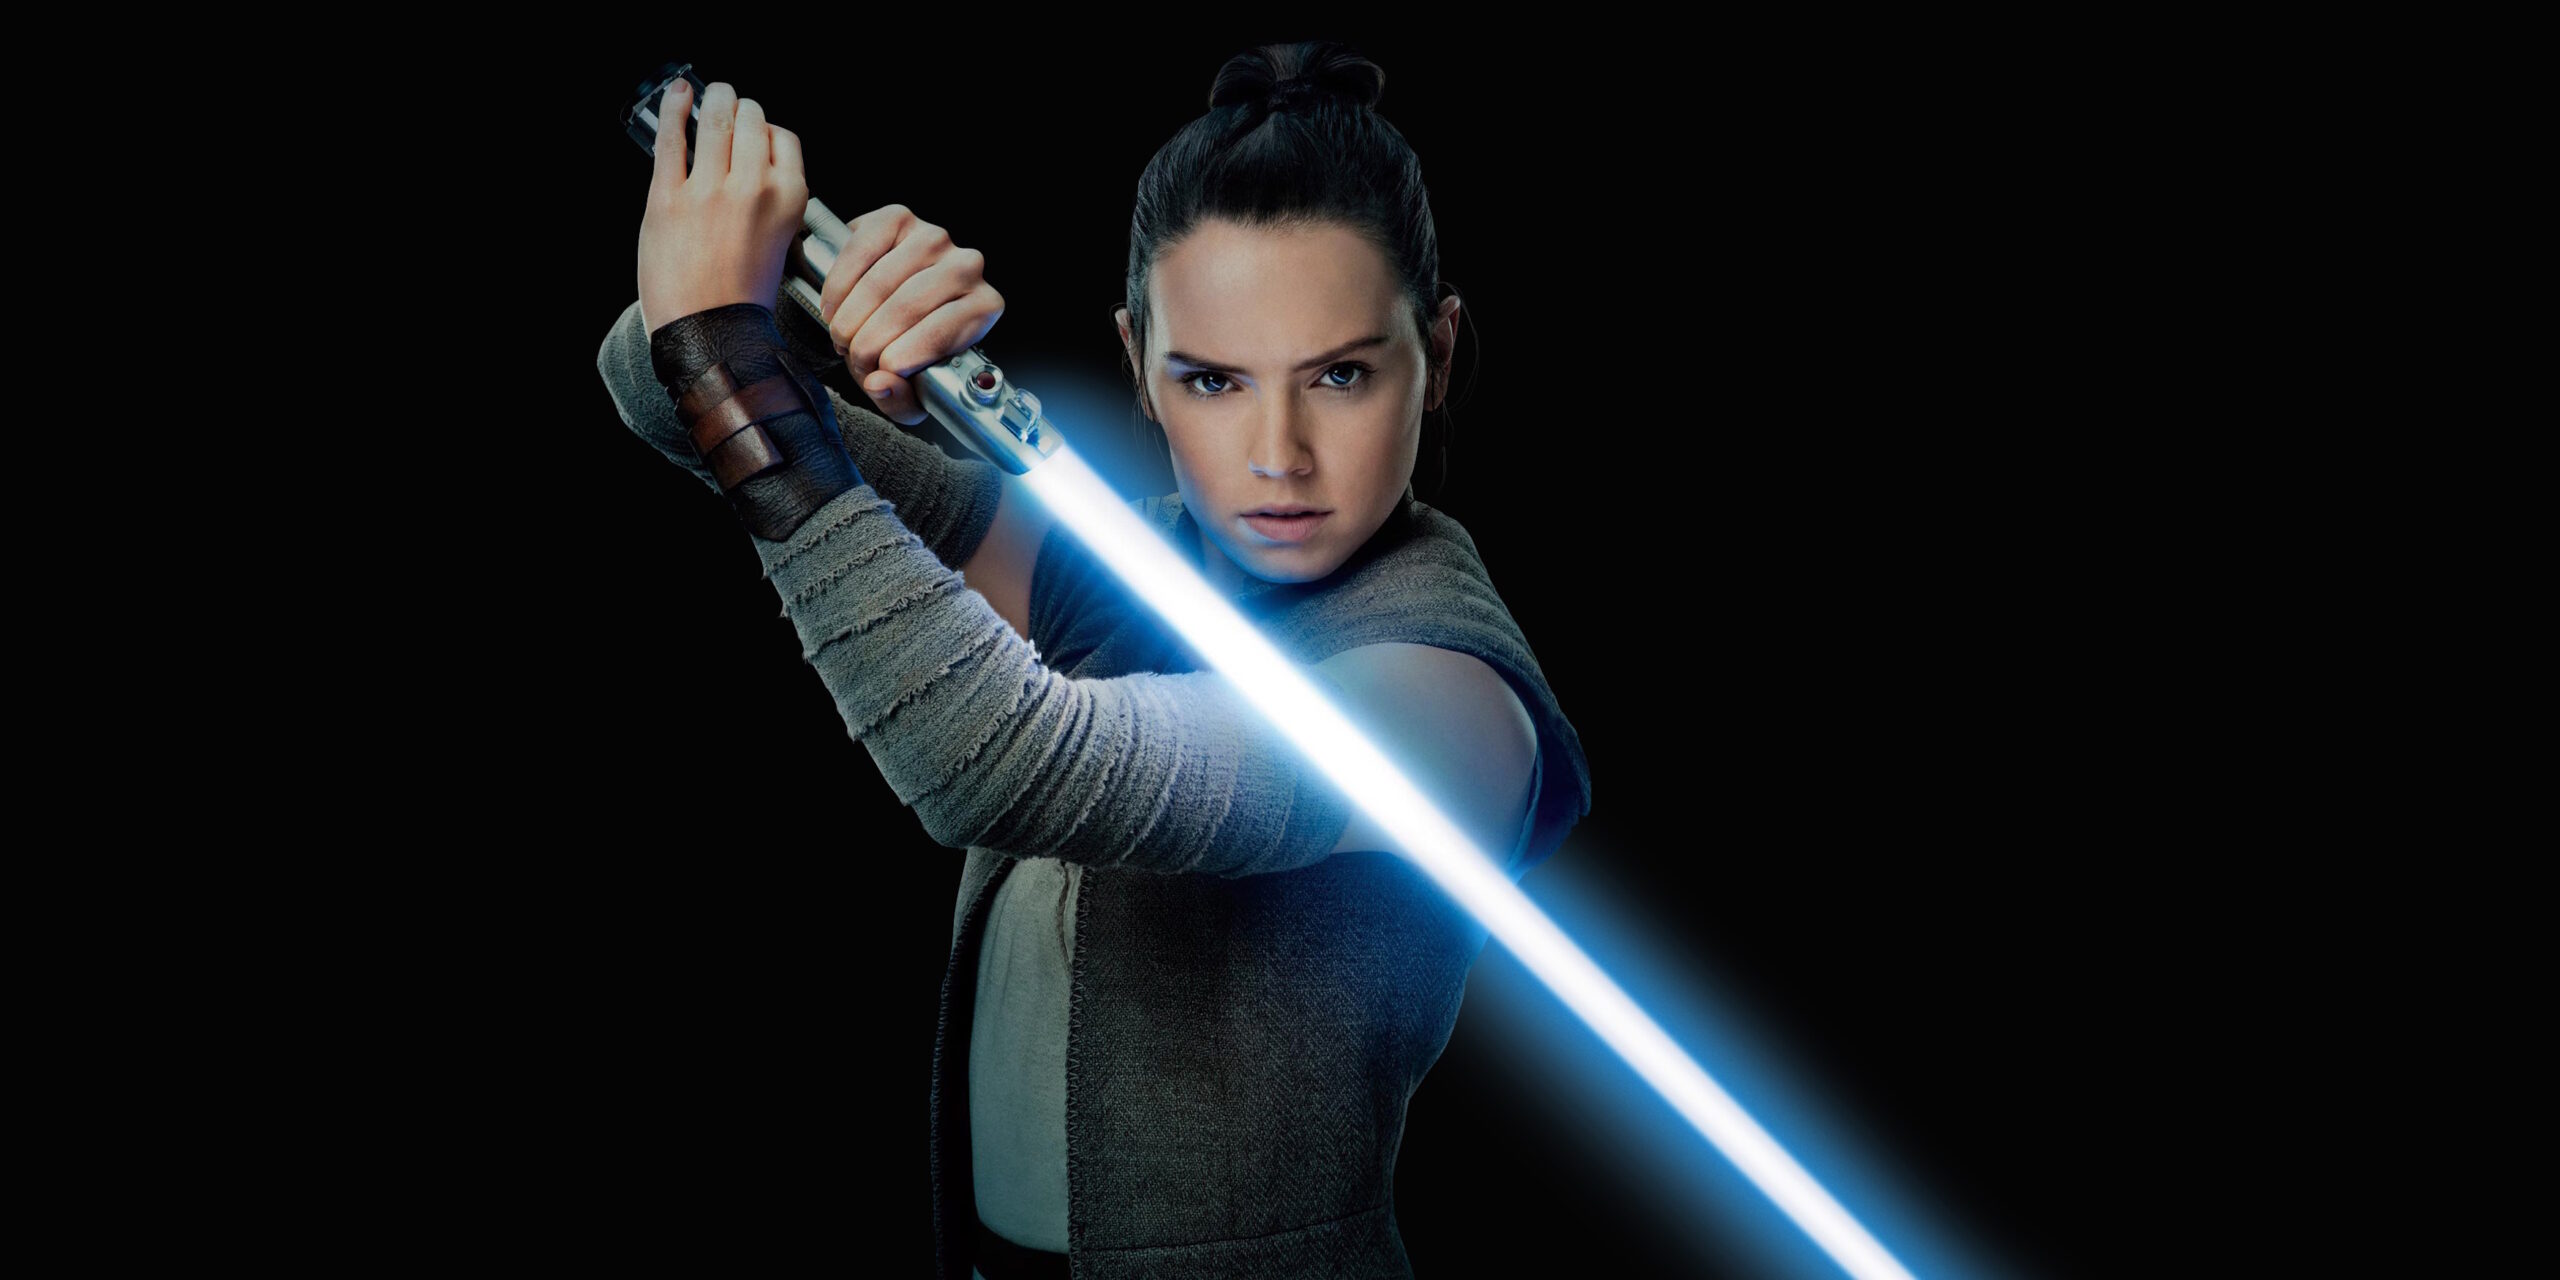 Daisy Ridley May Also Appear In Shawn Levy Star Wars Film | Barside Buzz